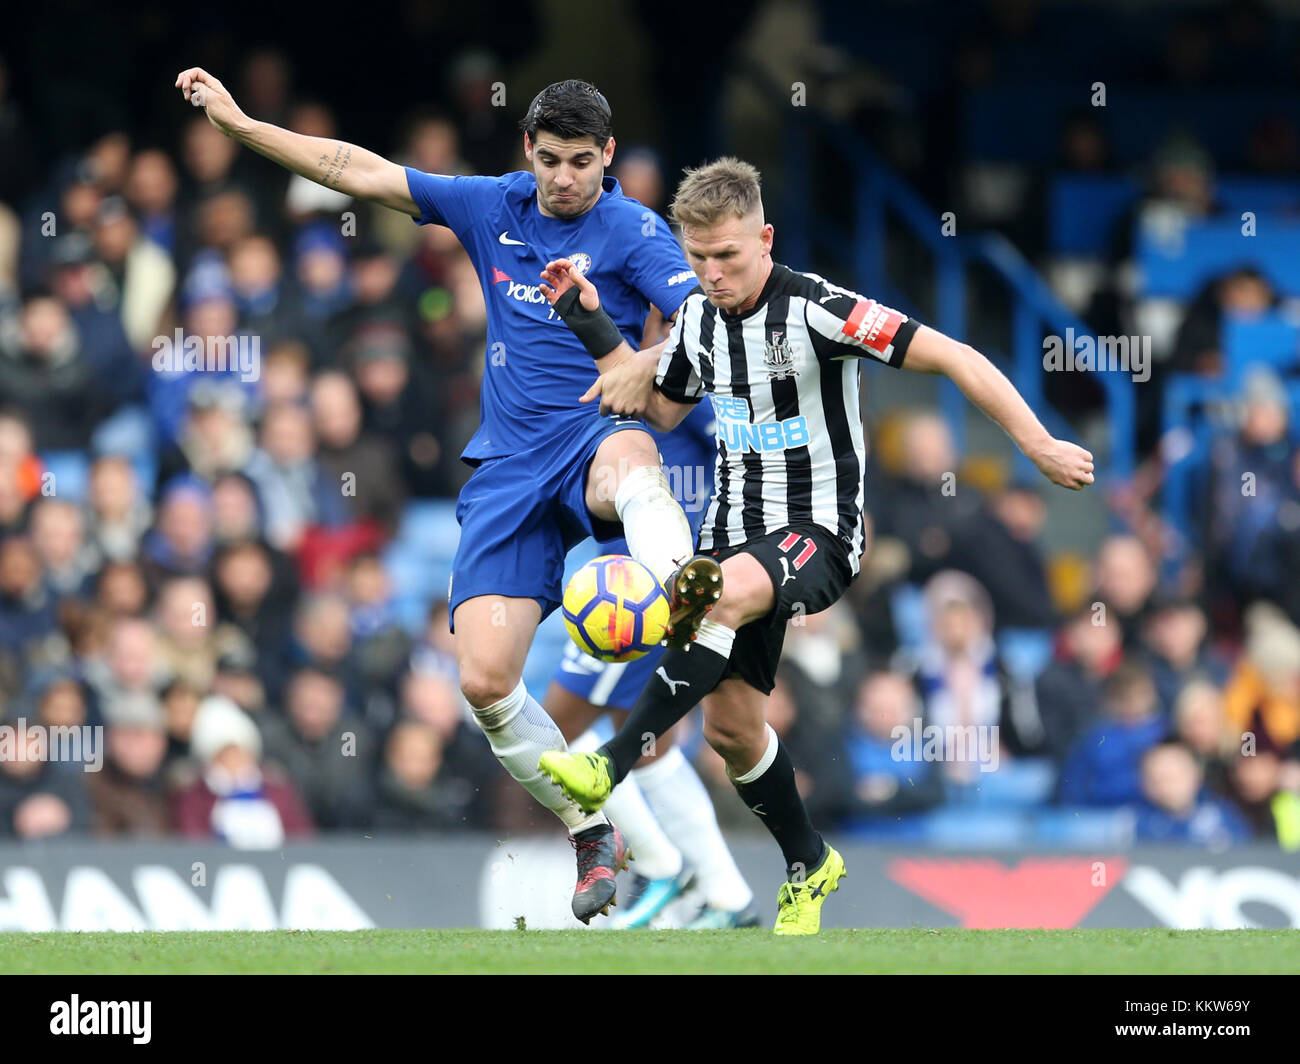 Newcastle United's Matt Ritchie (right) and Chelsea's Alvaro Morata battle for the ball during the Premier League match at Stamford Bridge, London. PRESS ASSOCIATION Photo Picture date: Saturday December 2, 2017. See PA story SOCCER London. Photo credit should read: Steven Paston/PA Wire. RESTRICTIONS: No use with unauthorised audio, video, data, fixture lists, club/league logos or 'live' services. Online in-match use limited to 75 images, no video emulation. No use in betting, games or single club/league/player publications. Stock Photo